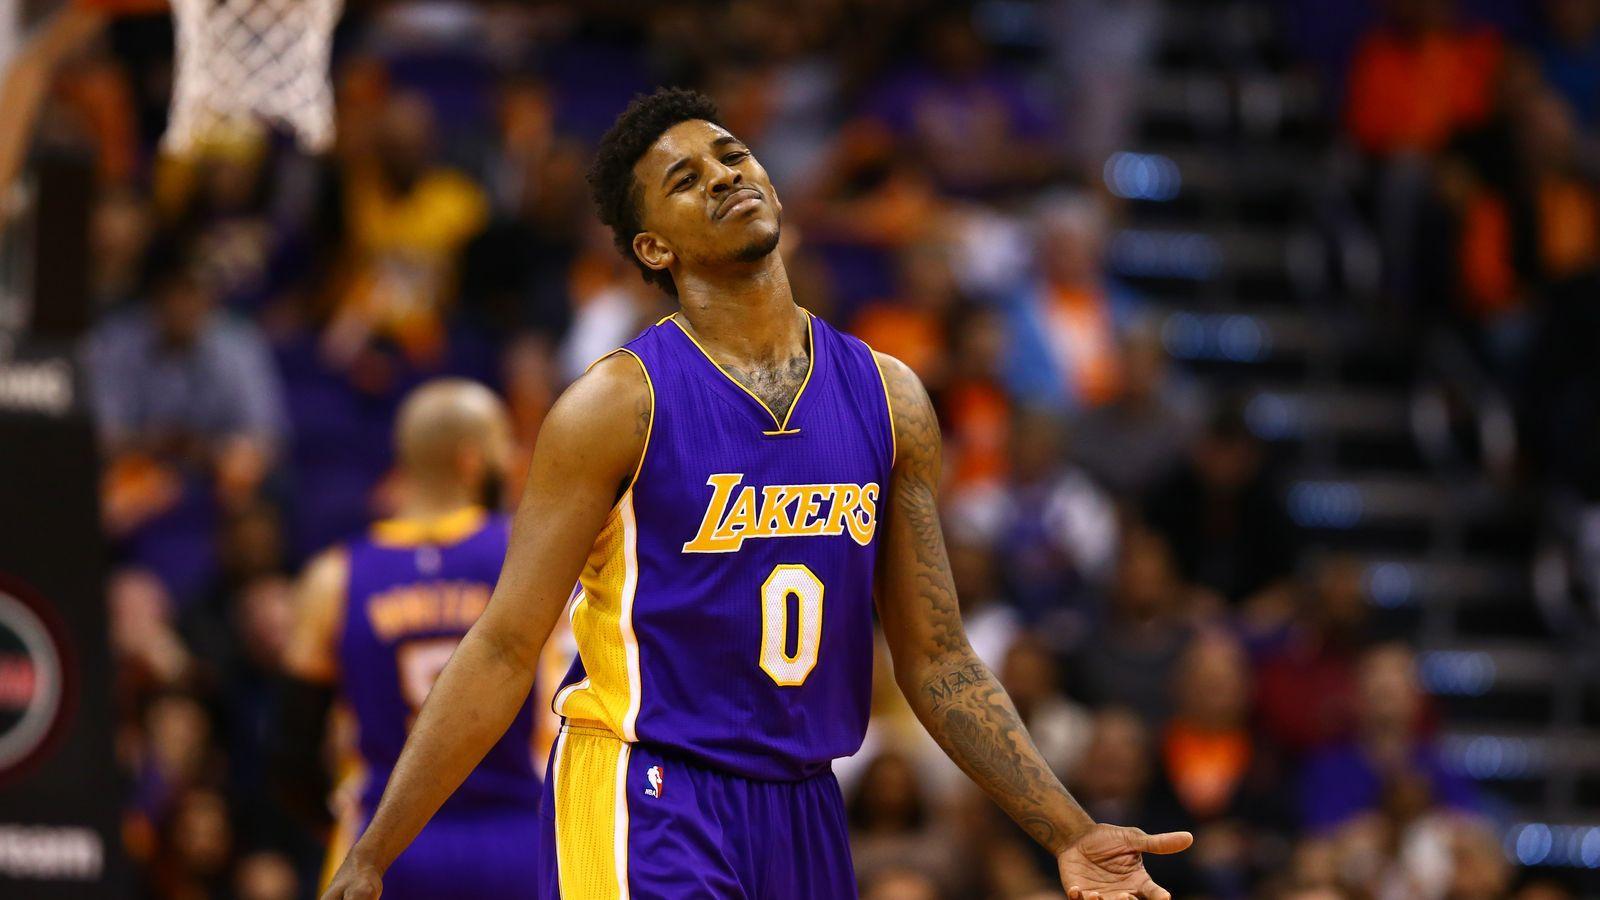 Nick Young Inspired By Kobe Bryant to Dish Out 3 Assists